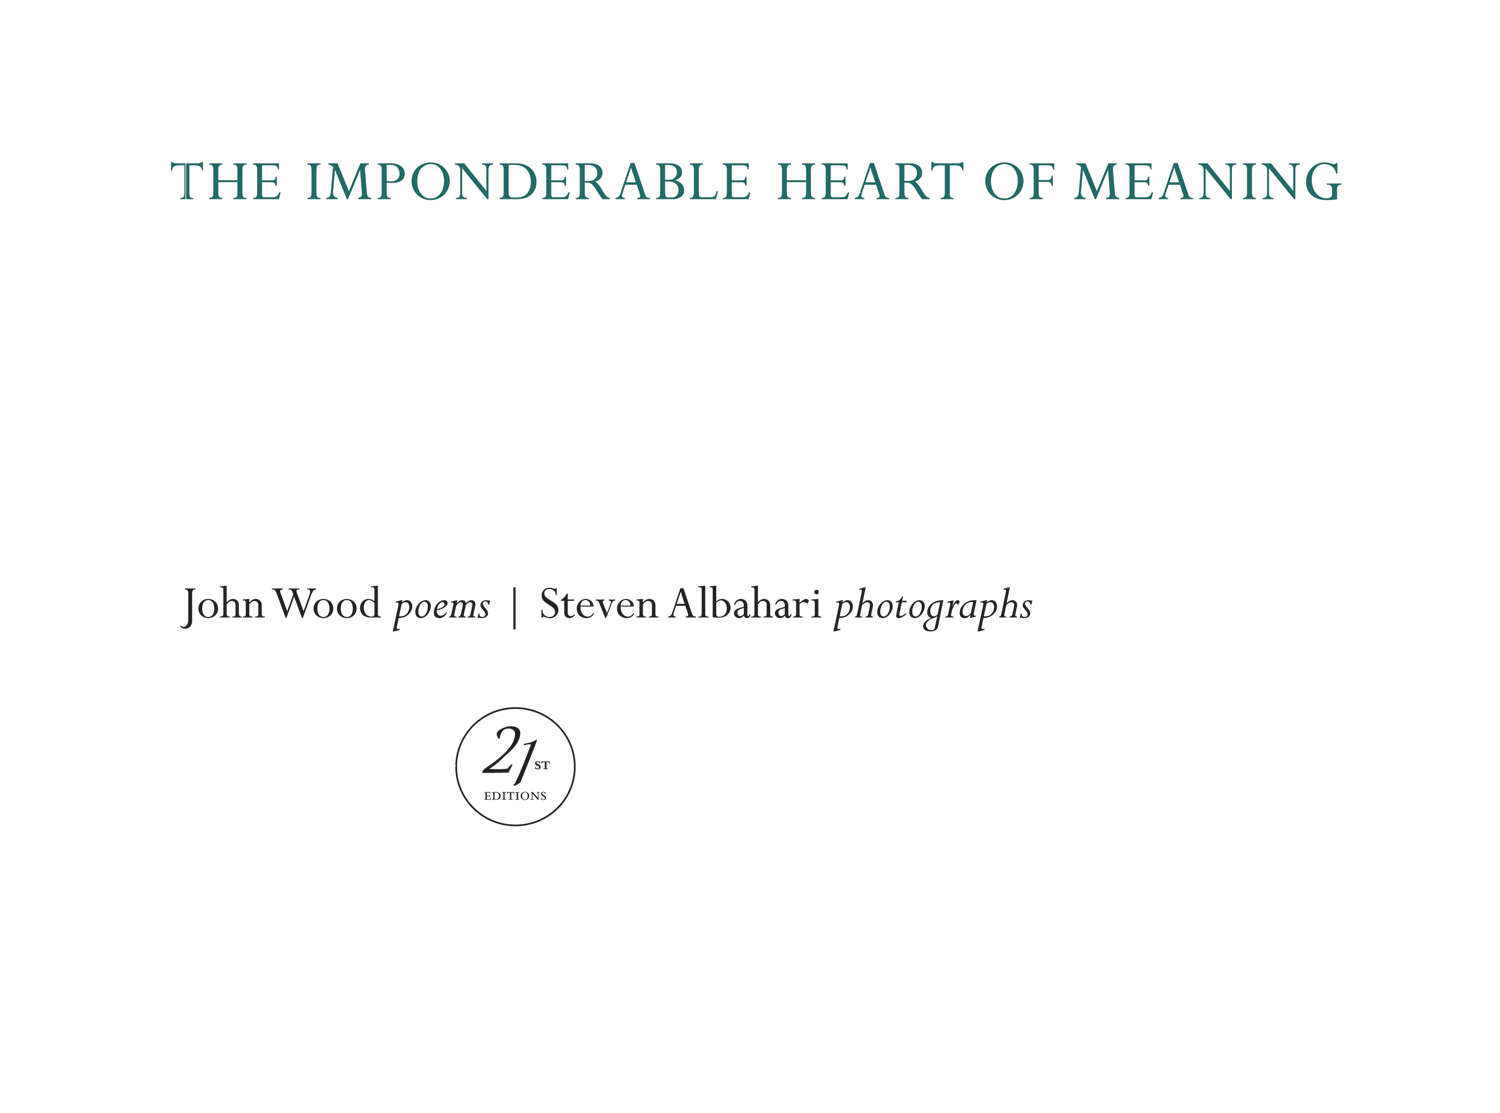 John Wood, The Imponderable Heart of Meaning